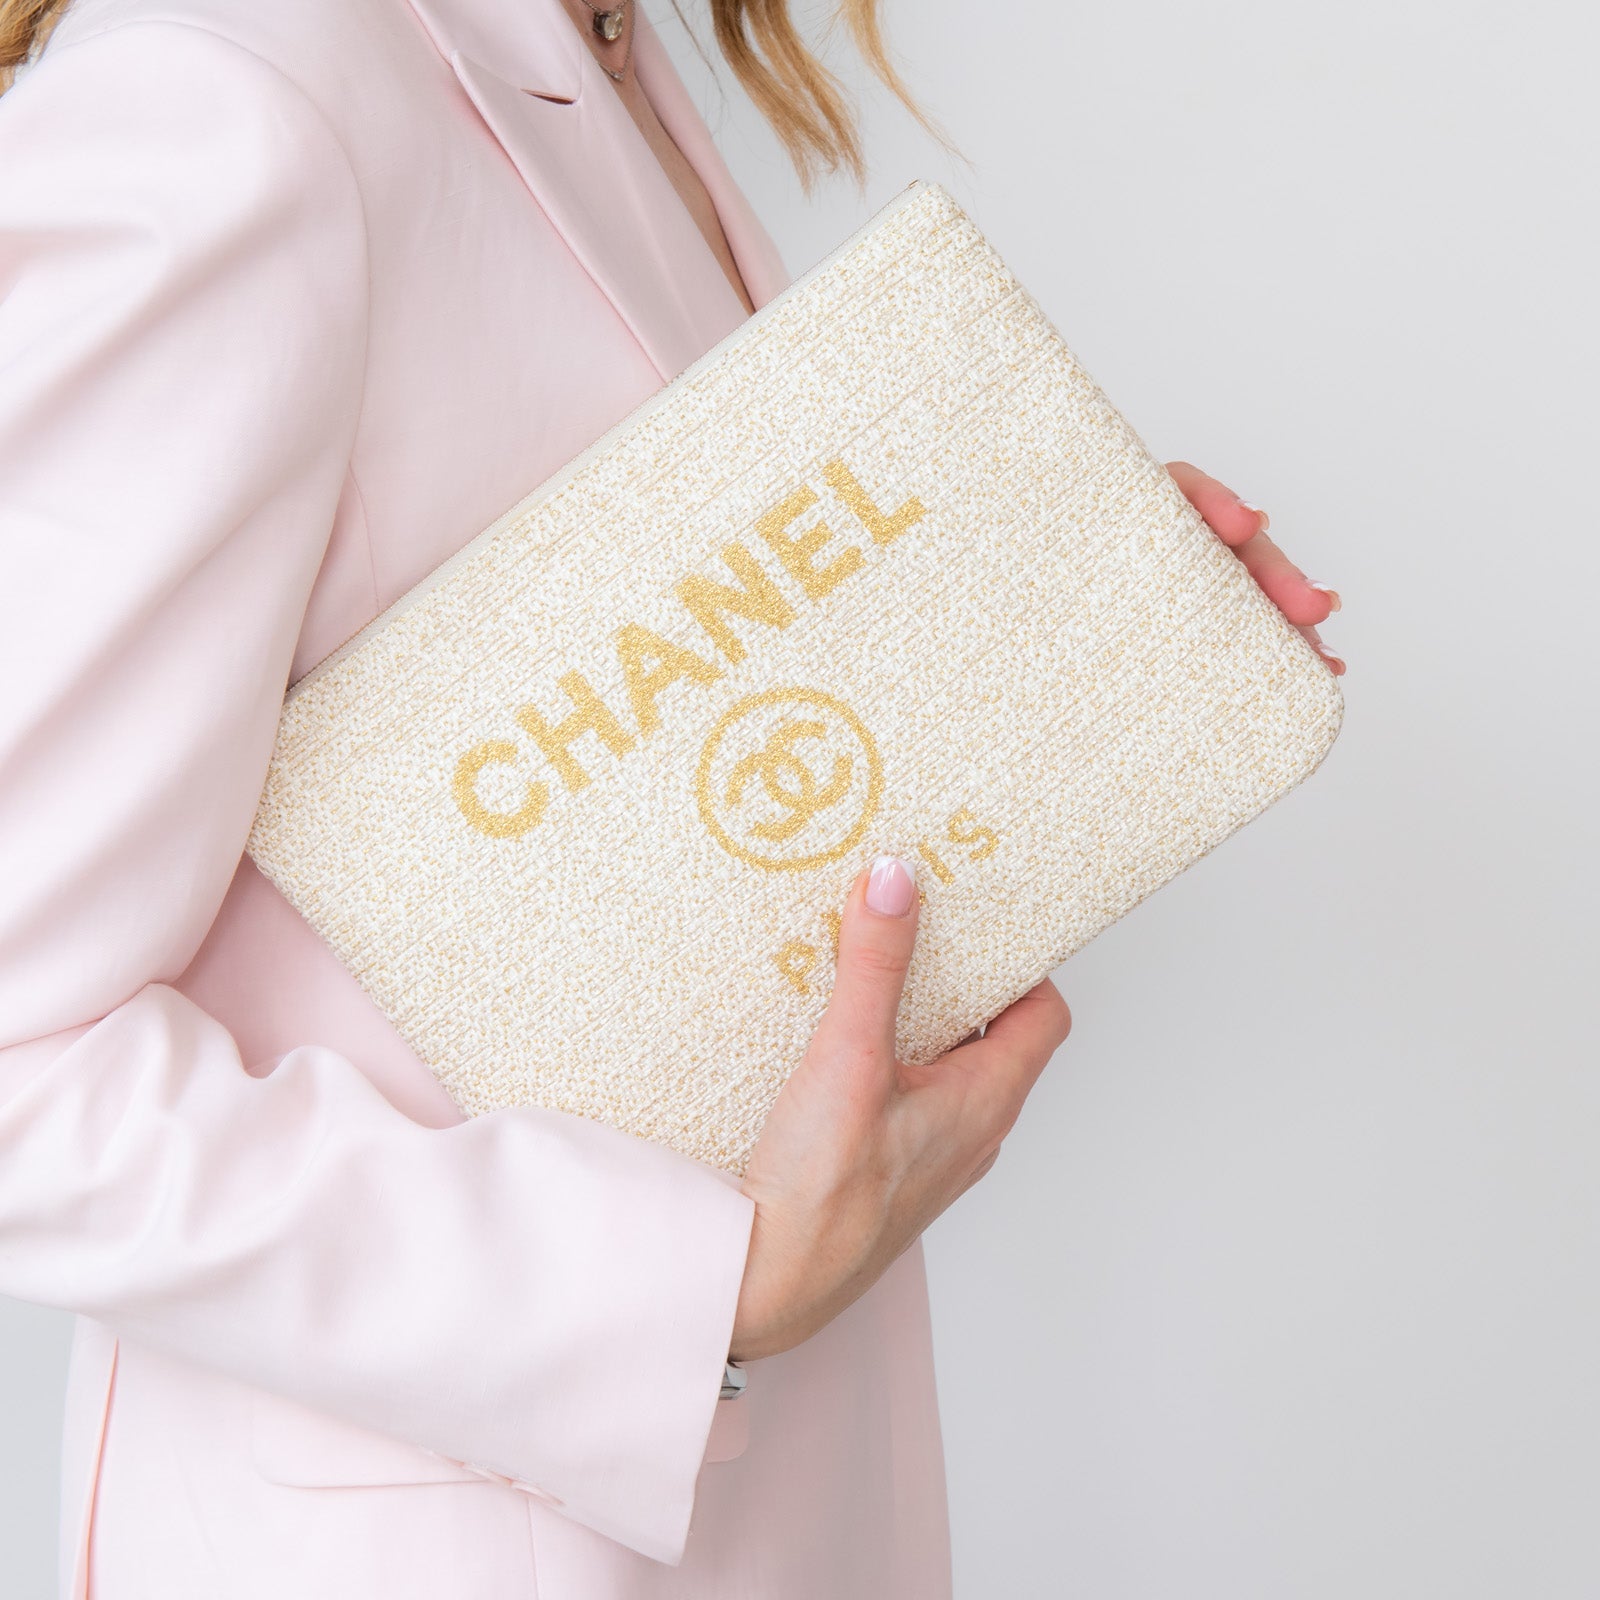 Chanel Cream Deauville Large Clutch Bag - Image 4 of 8